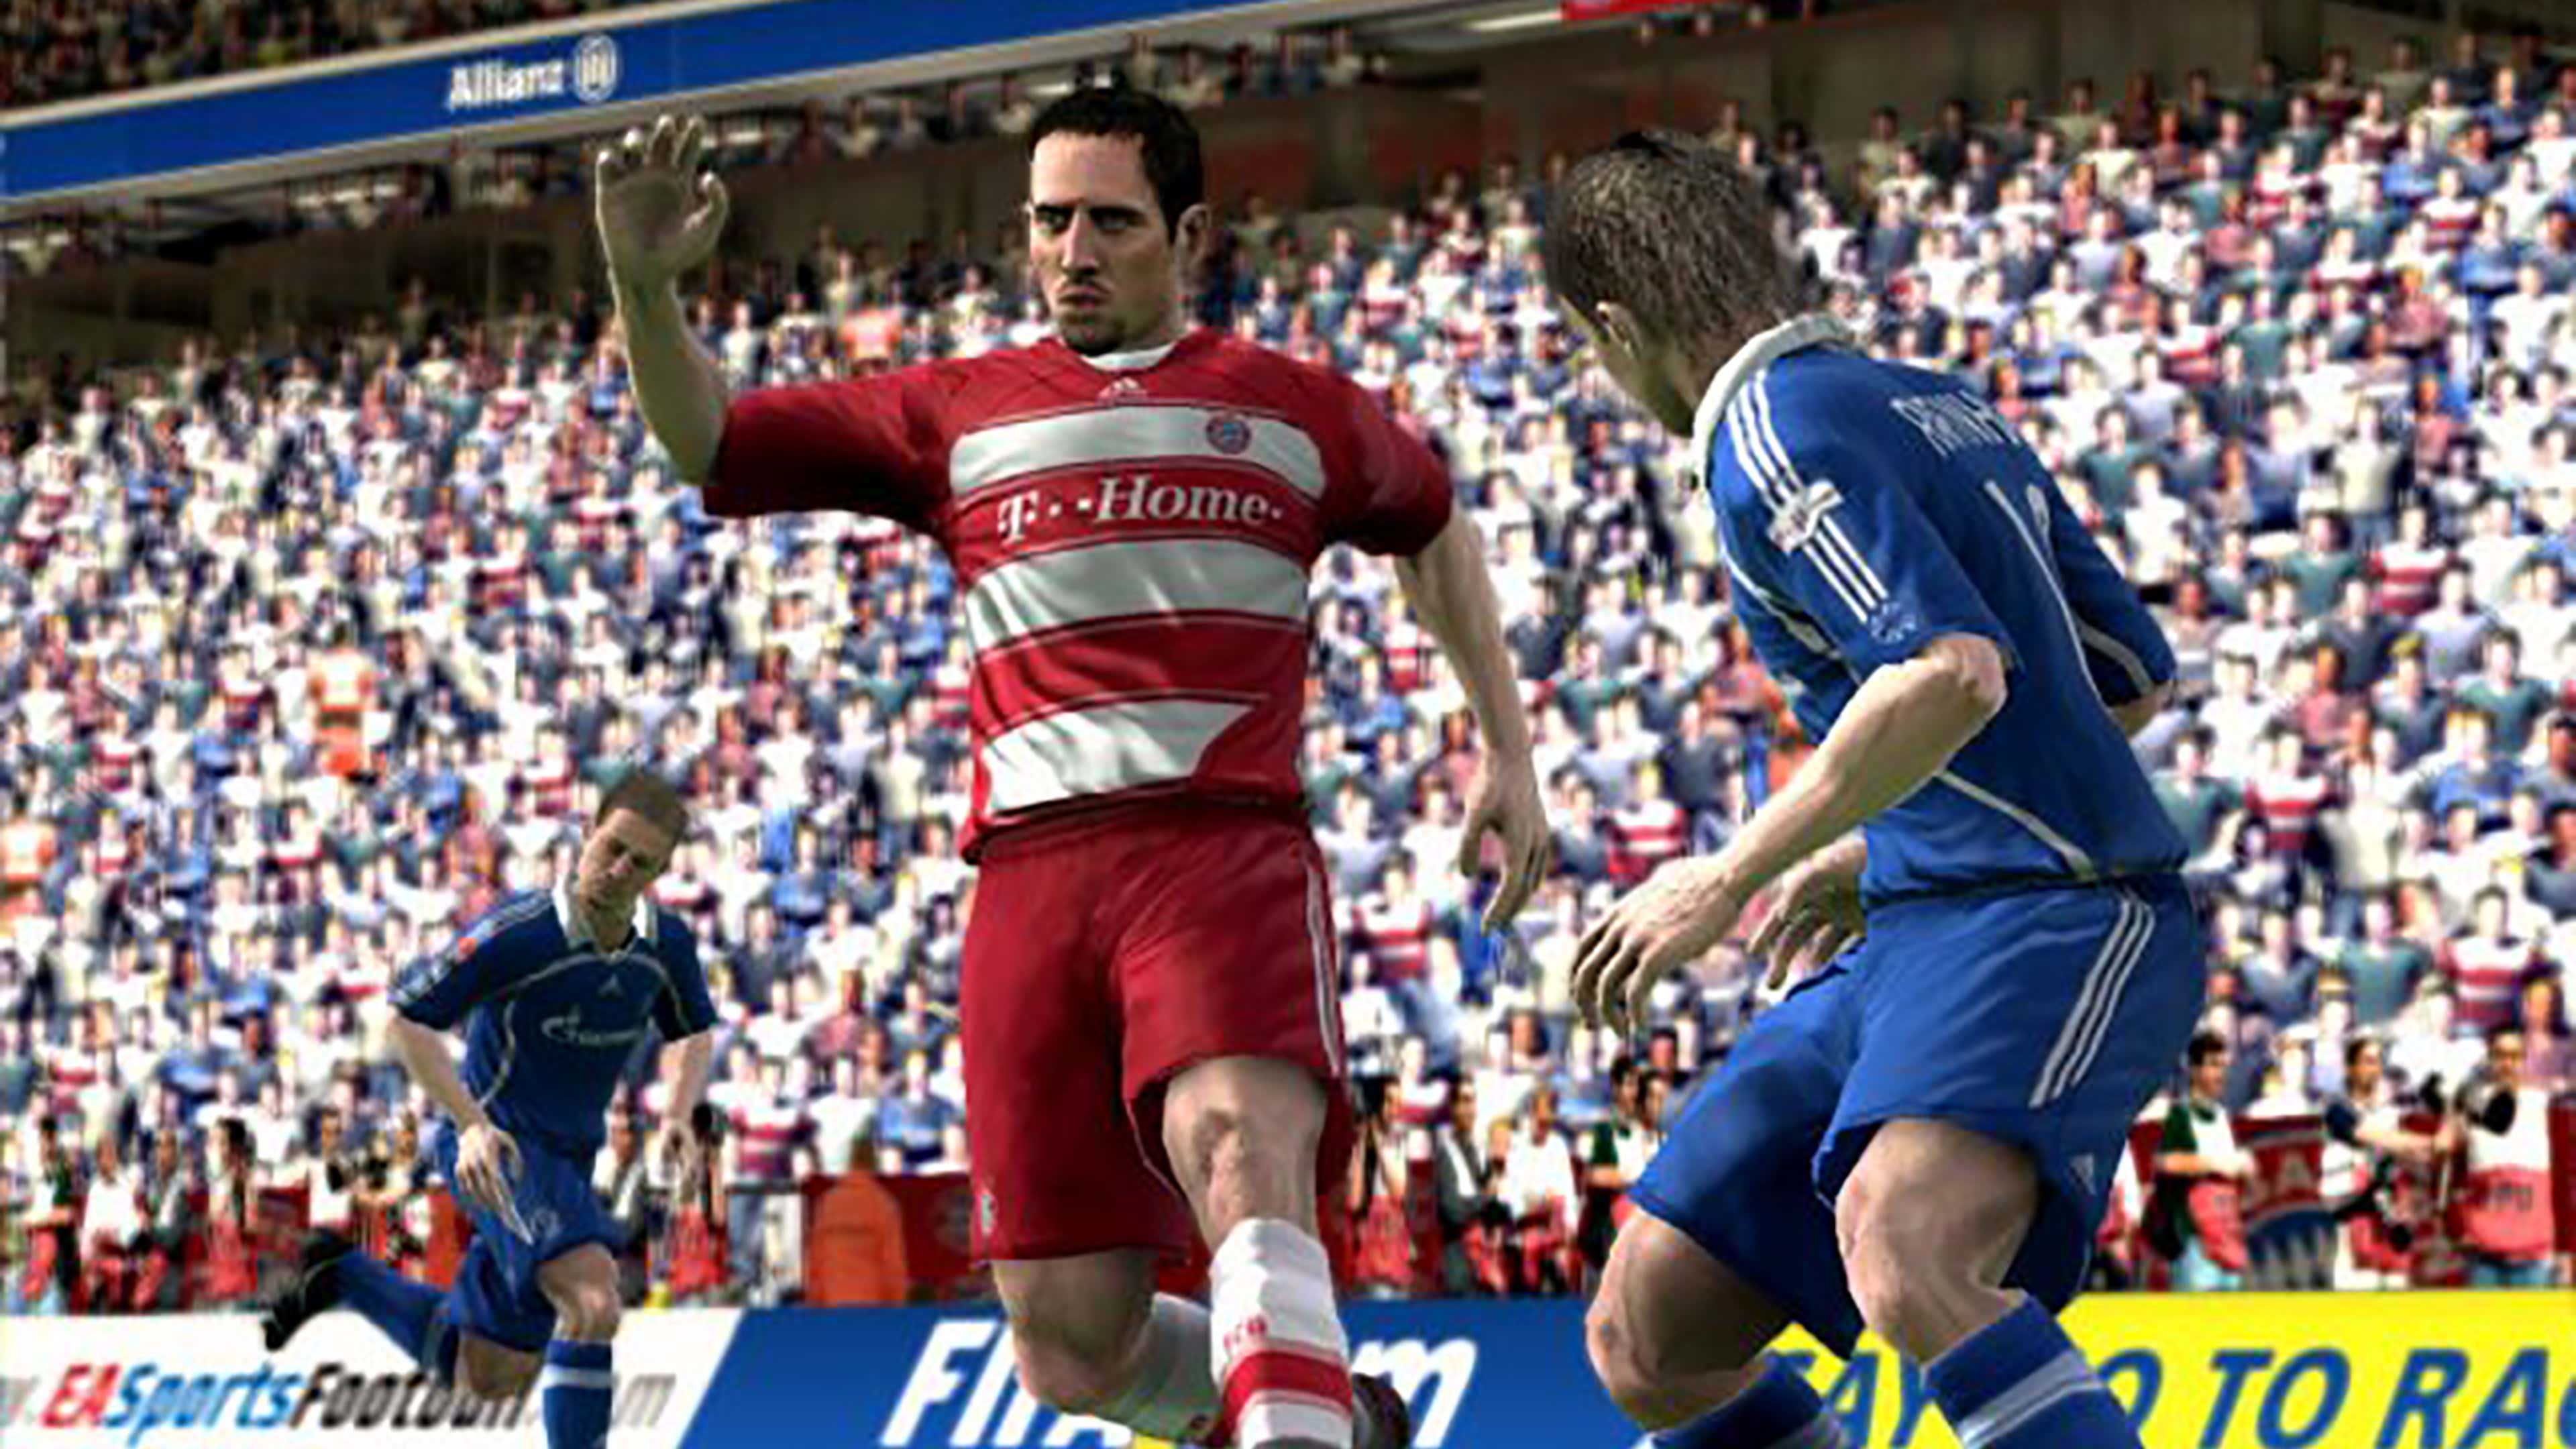 An Exclusive Look at FIFA 09's Ultimate Team Mode - GameSpot